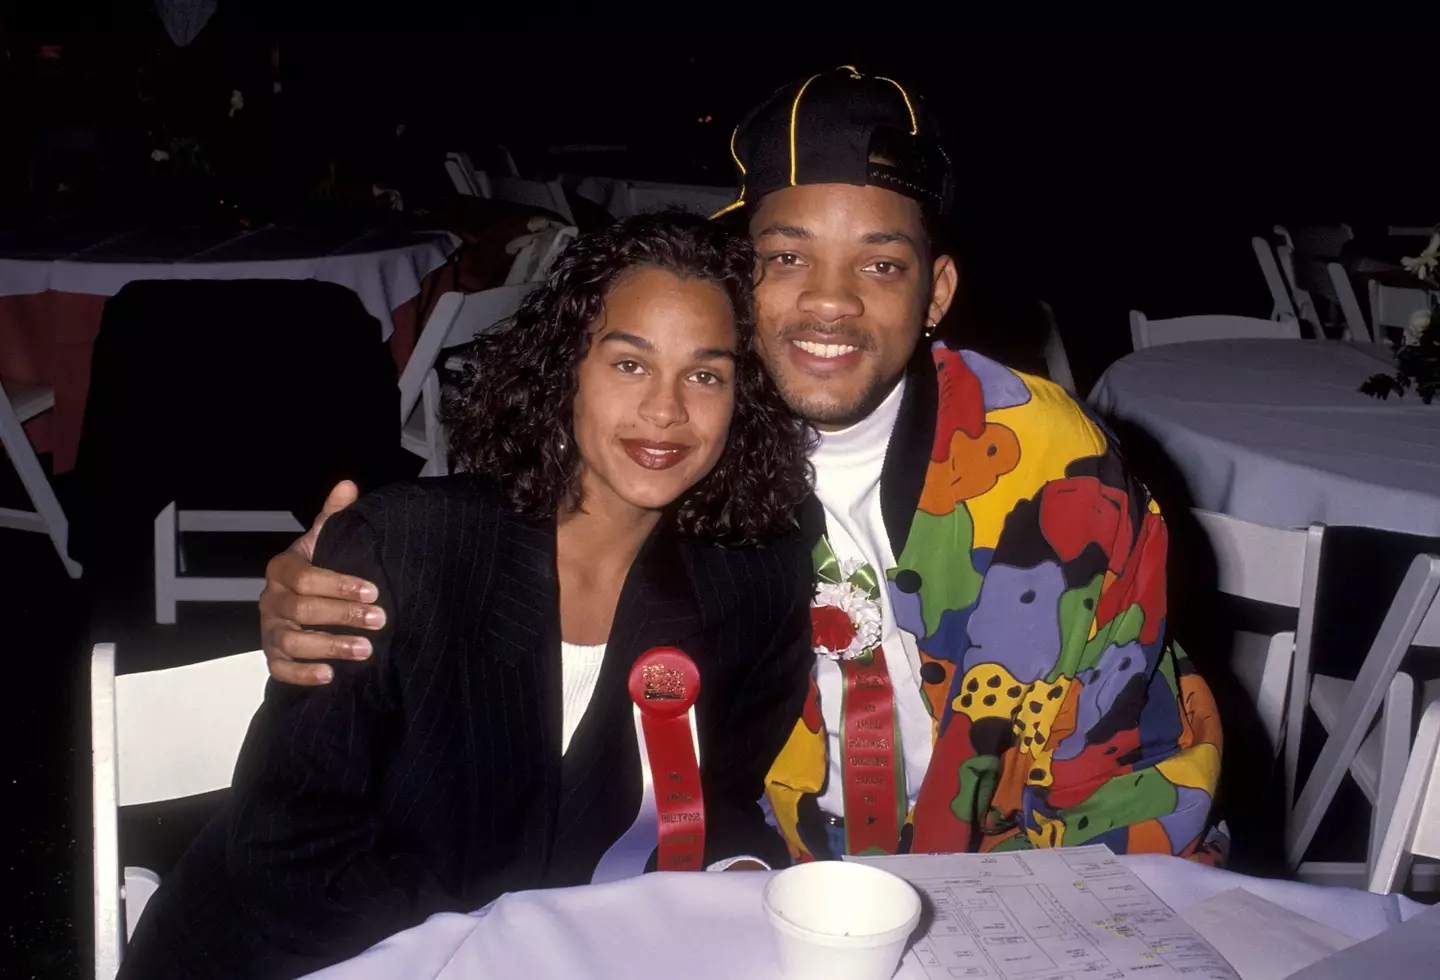 Will Smith and then-girlfriend Sheree Zampino pictured in 1991.